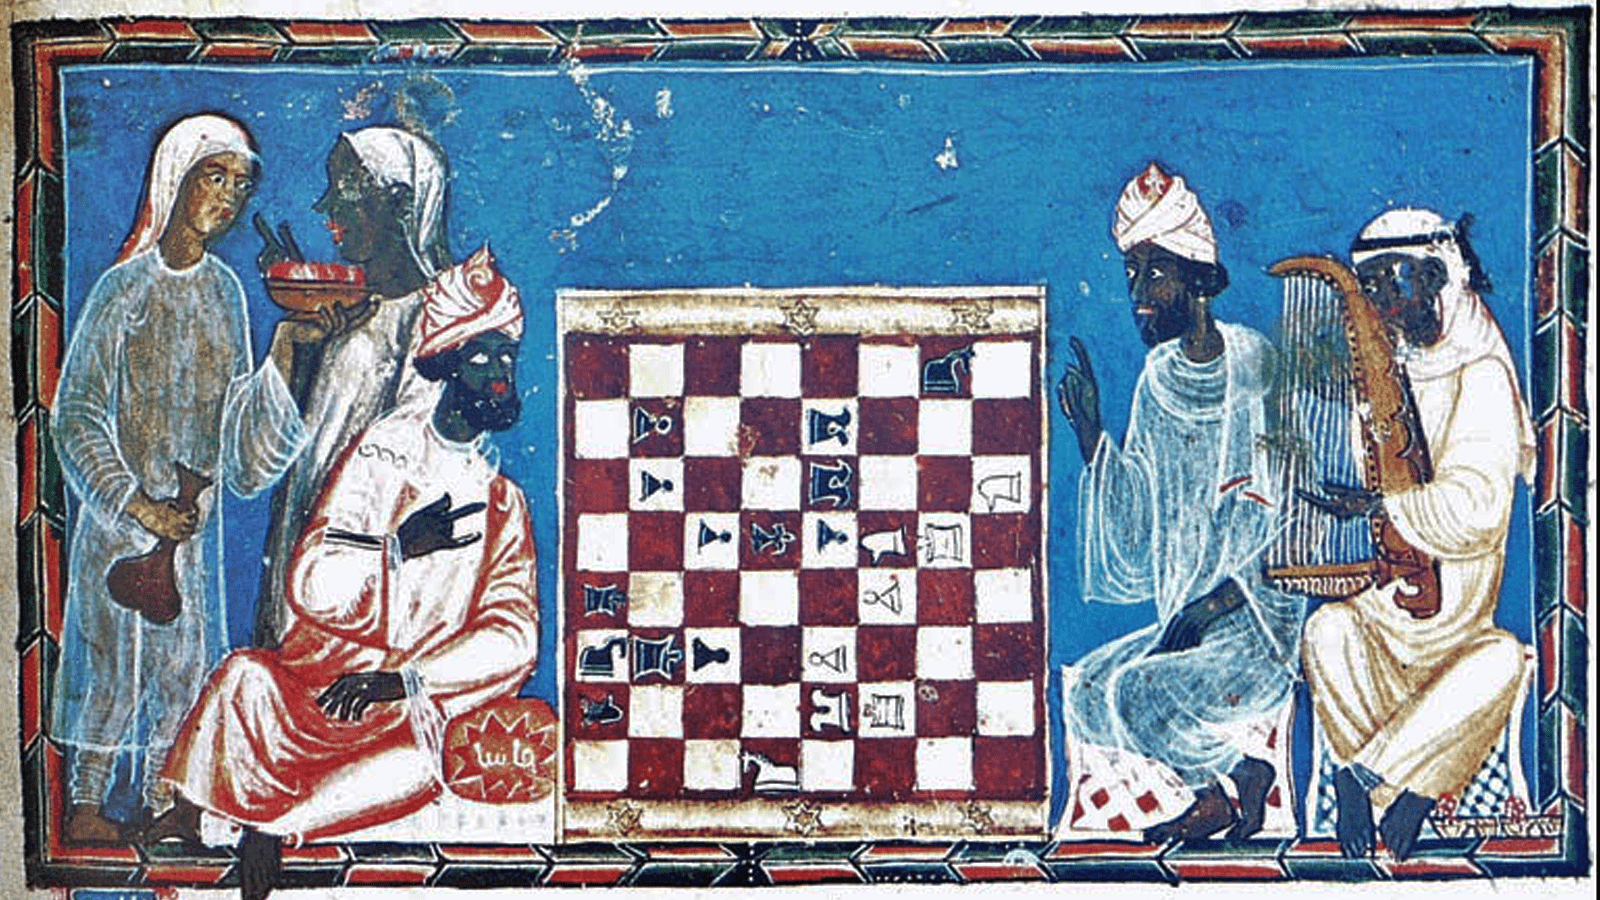 Emory Tate - A pioneer for African American Chess! 